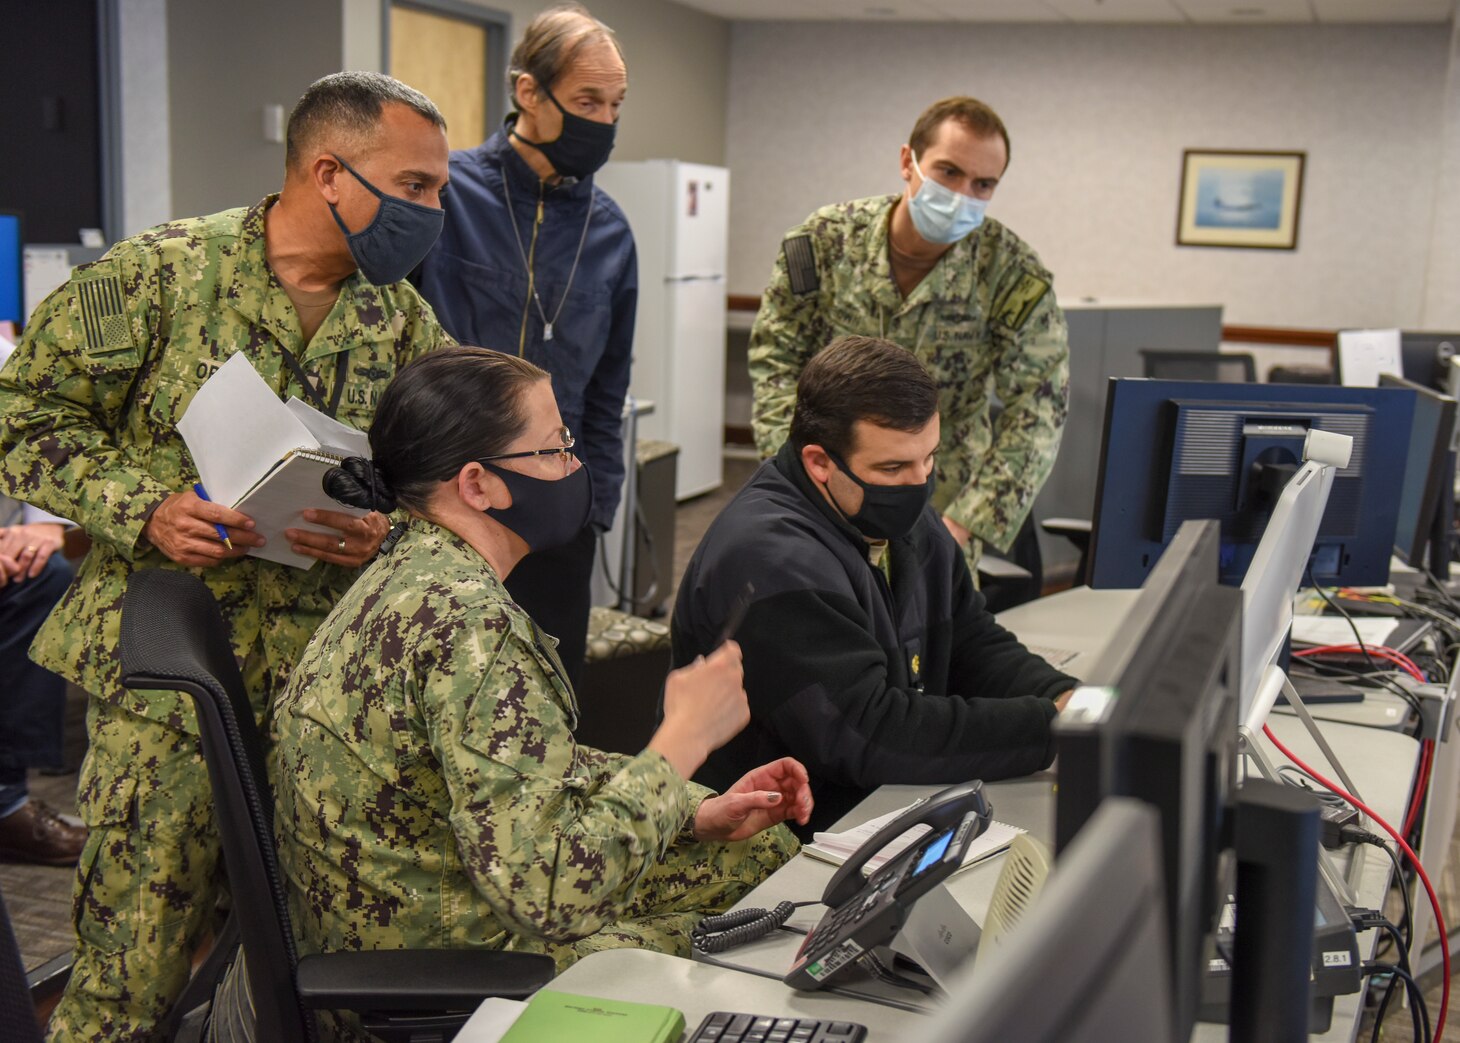 Navy Reserve Sailors and a civilian assigned to the maritime space cyber fires and effects coordination cell during Exercise Keen Edge 22 participate in a non-kinetic operations meeting the Fleet Cyber Command/U.S. 10th Fleet situation room. Keen Edge is a bilateral command post exercise conducted to increase combat readiness and synchronization between the U.S. and Japan. (U.S. Navy photo by Mass Communication Specialist 2nd Class William Sykes)